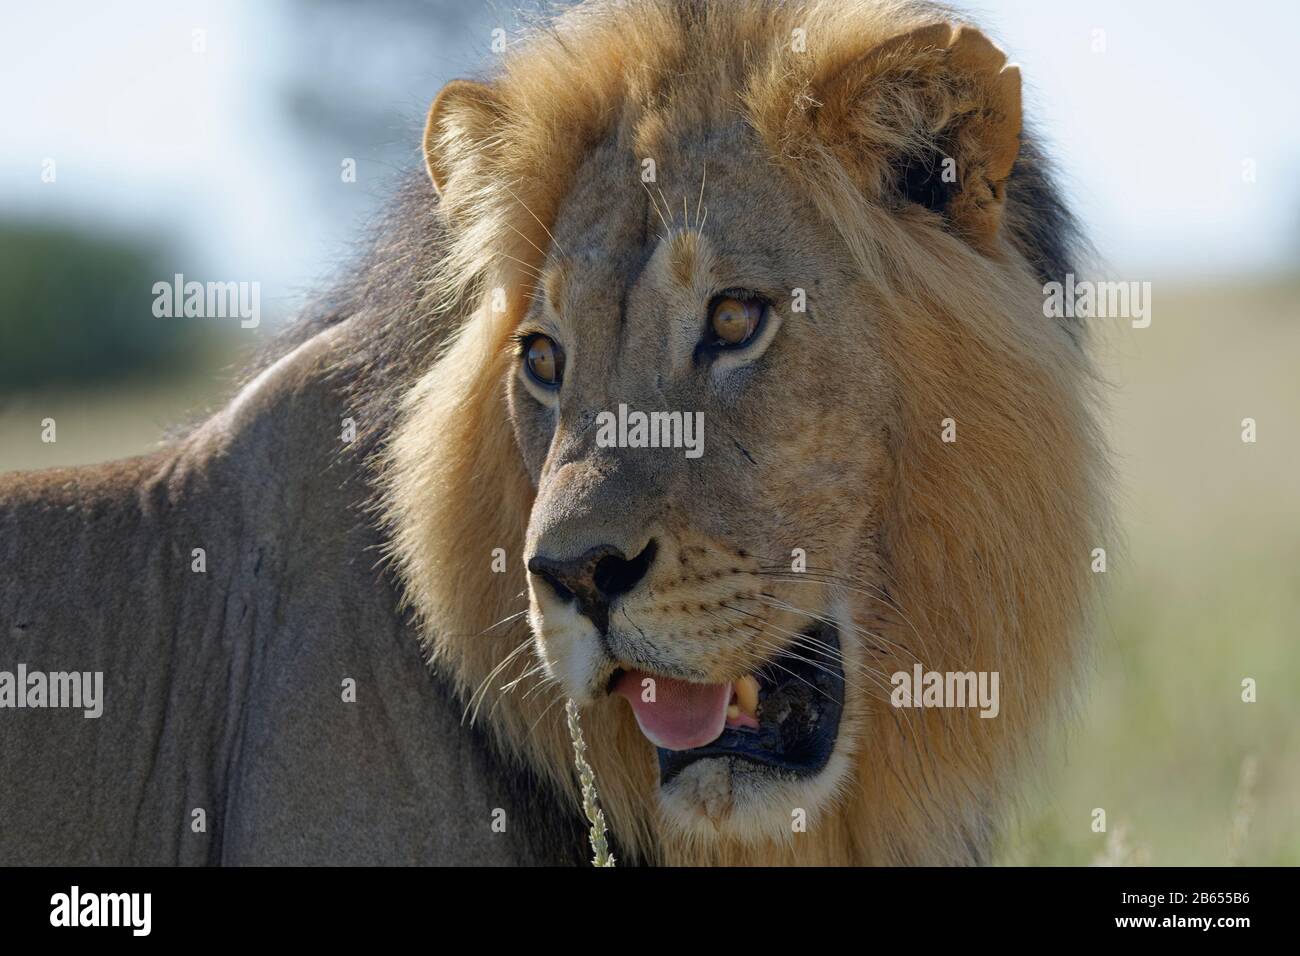 Lion (Panthera leo), black-maned male lion, close-up of the head, Kgalagadi Transfrontier Park, Northern Cape, South Africa, Africa Stock Photo